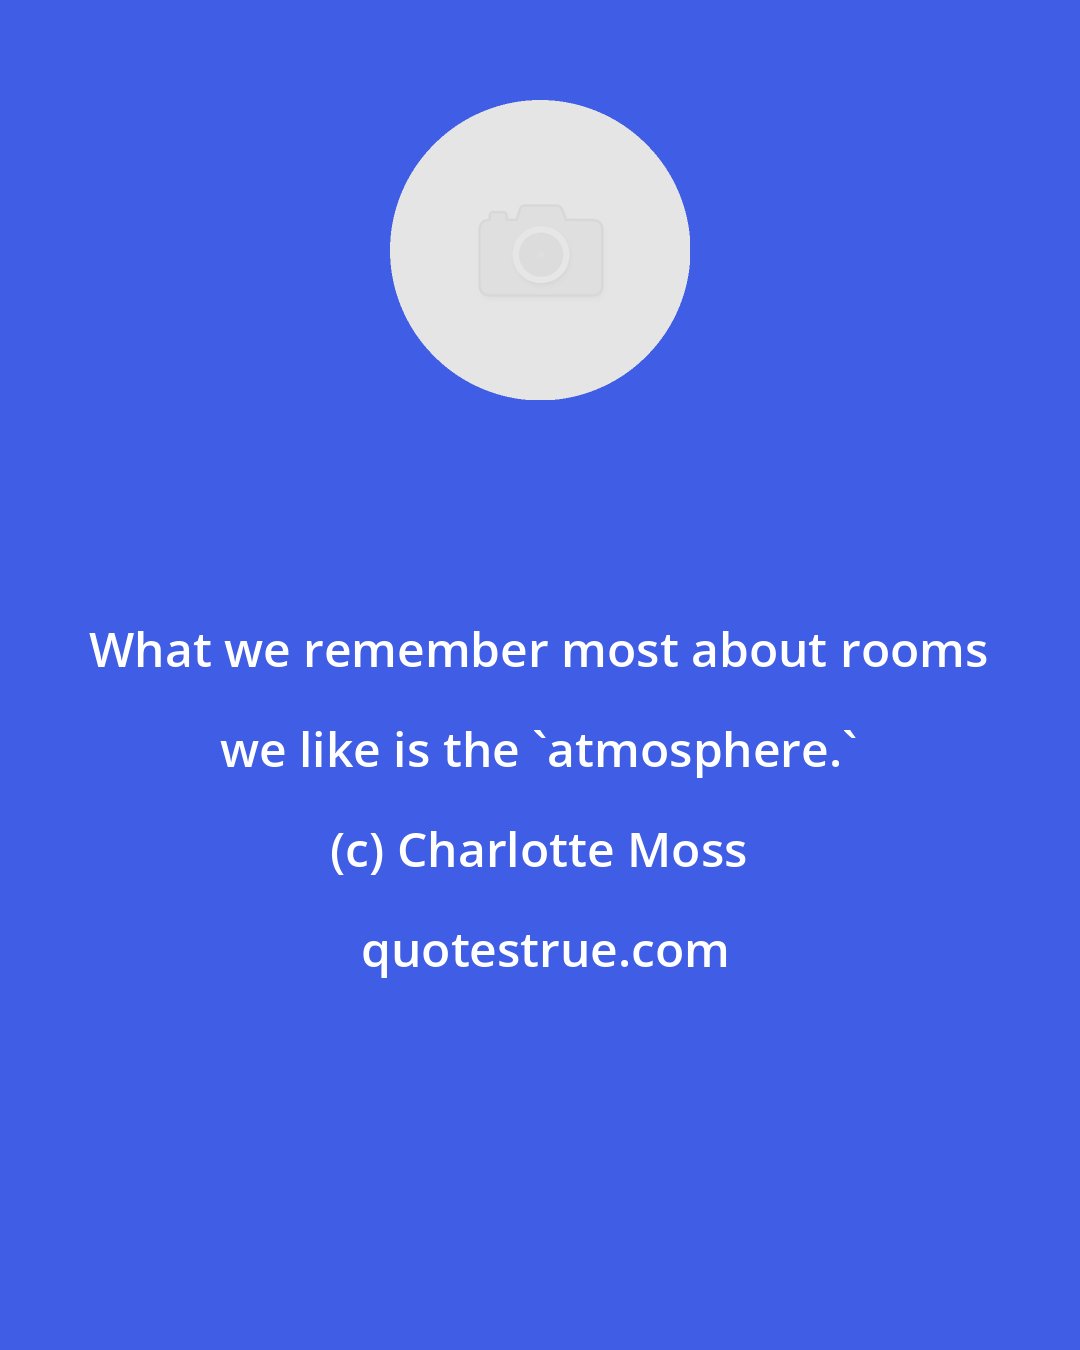 Charlotte Moss: What we remember most about rooms we like is the 'atmosphere.'